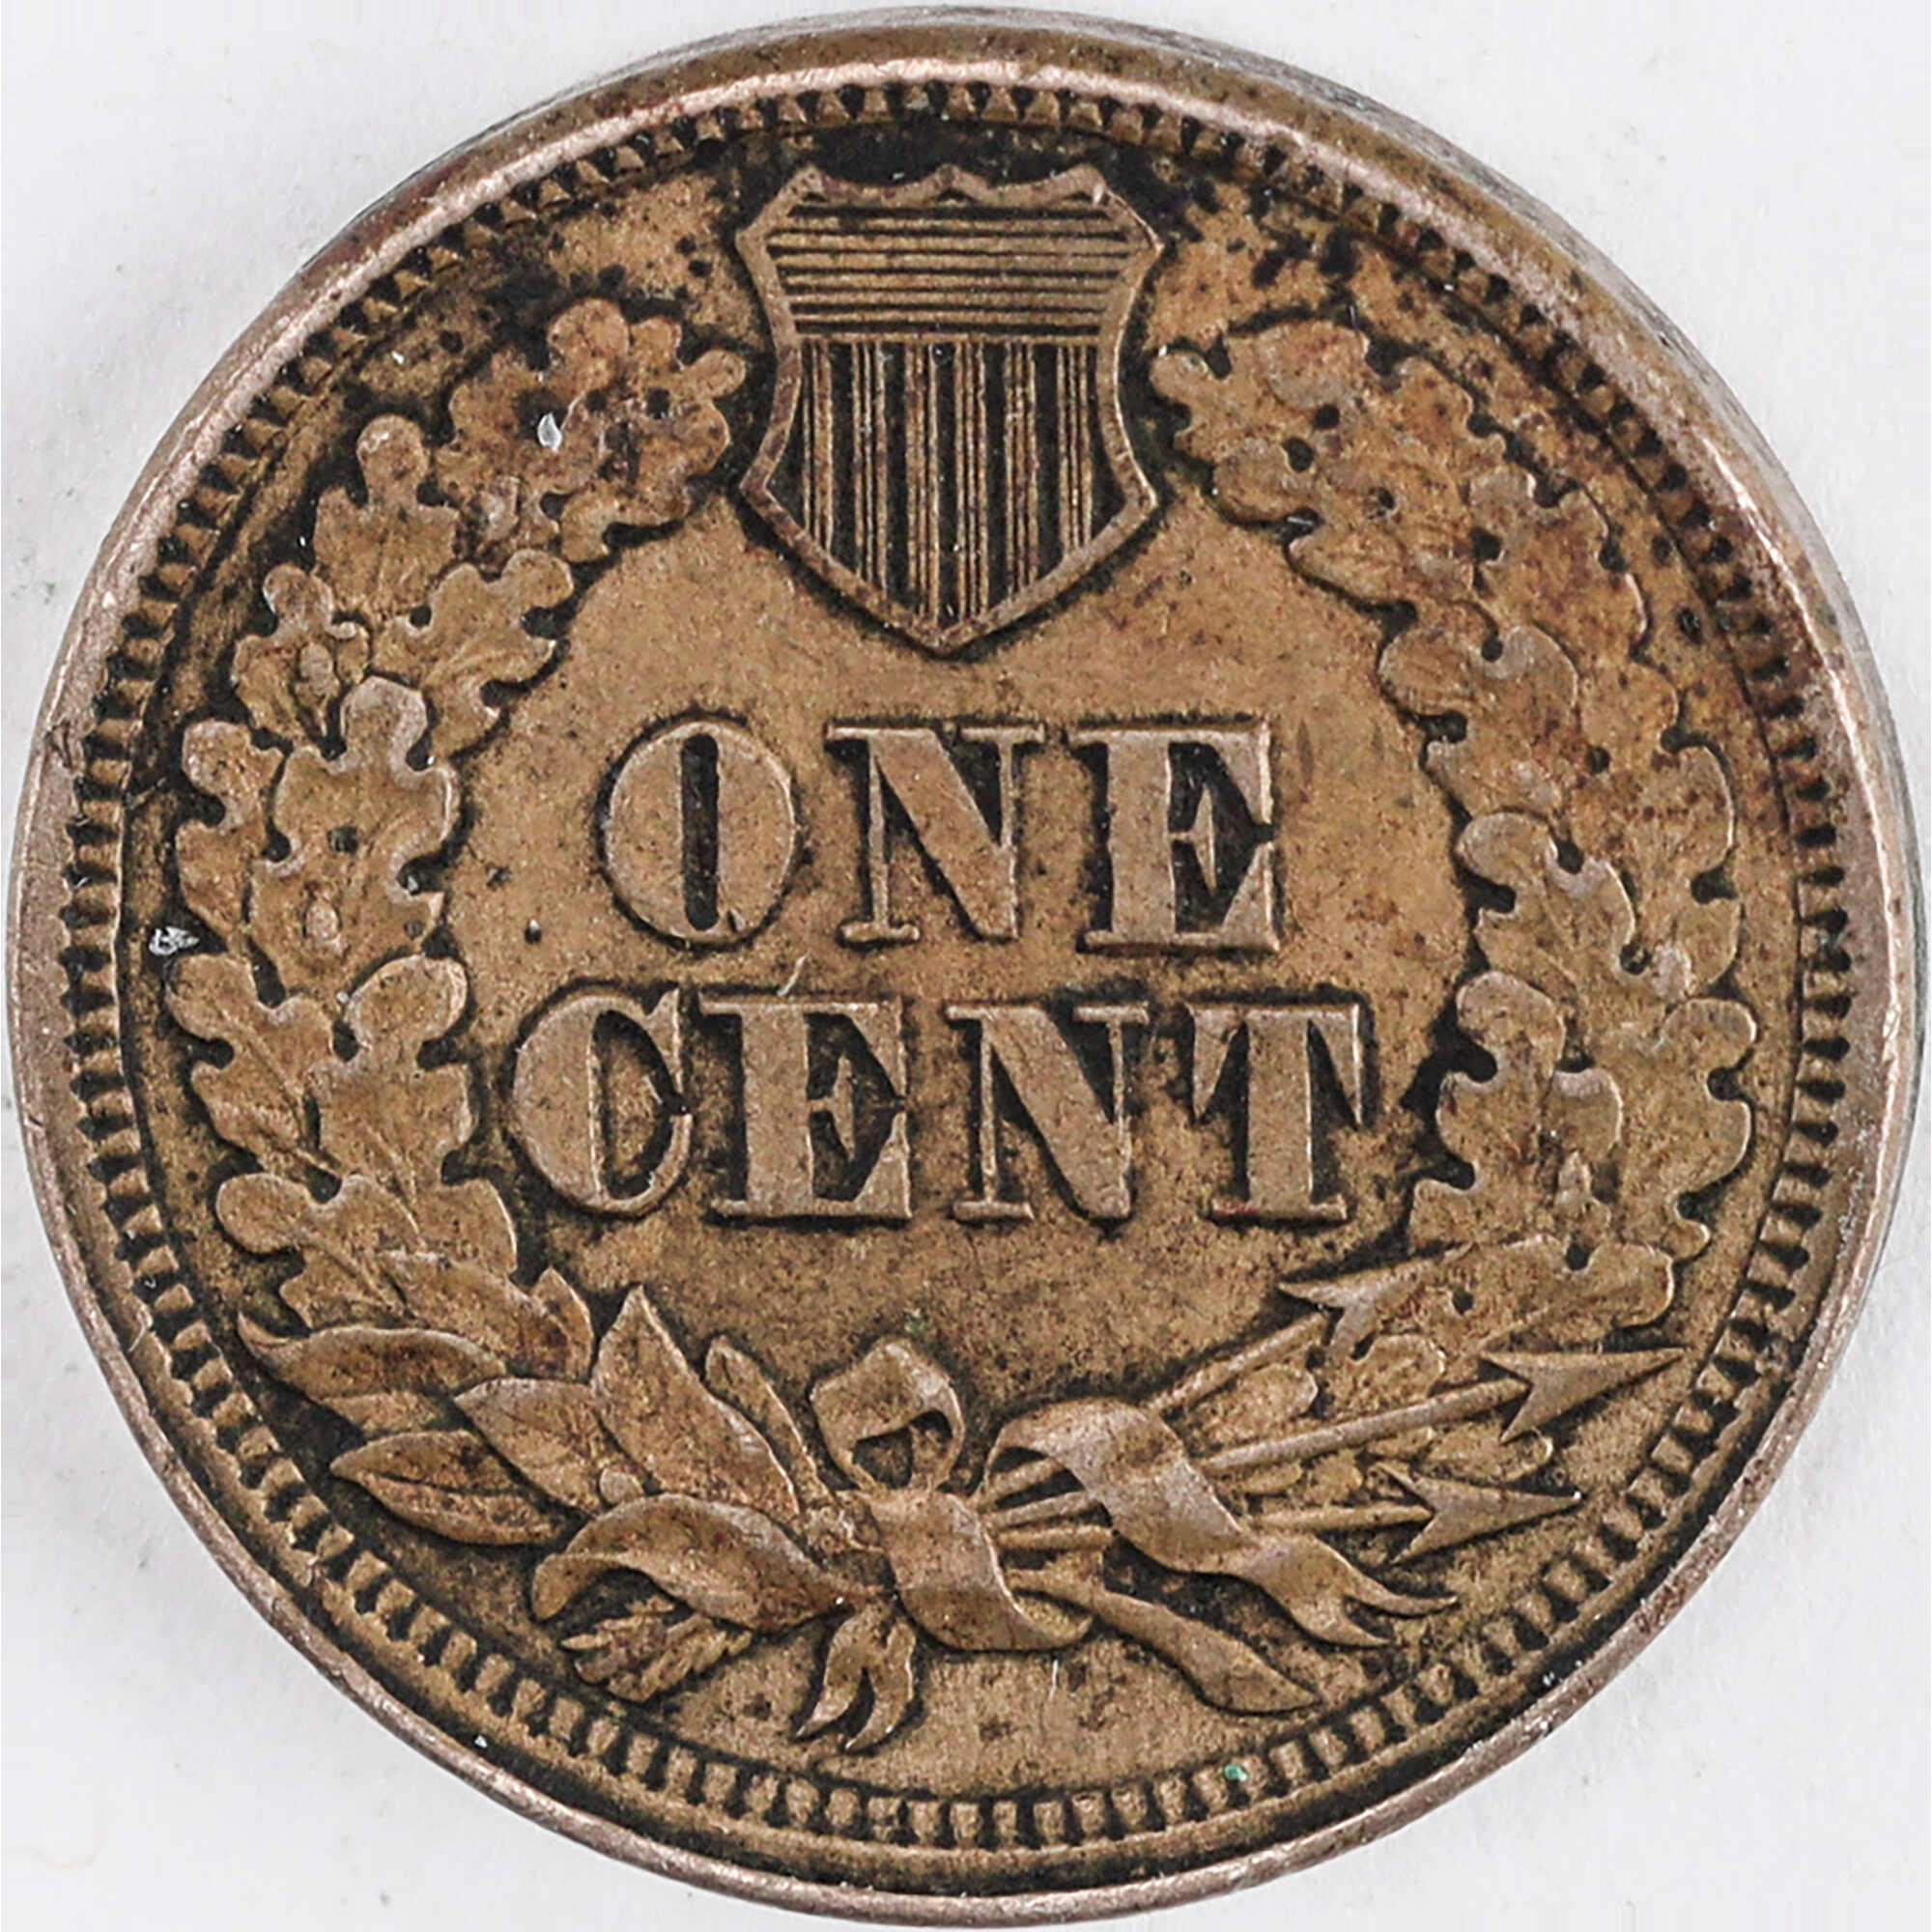 1863 Indian Head Cent XF EF Extremely Fine Copper-Nickel SKU:I12405